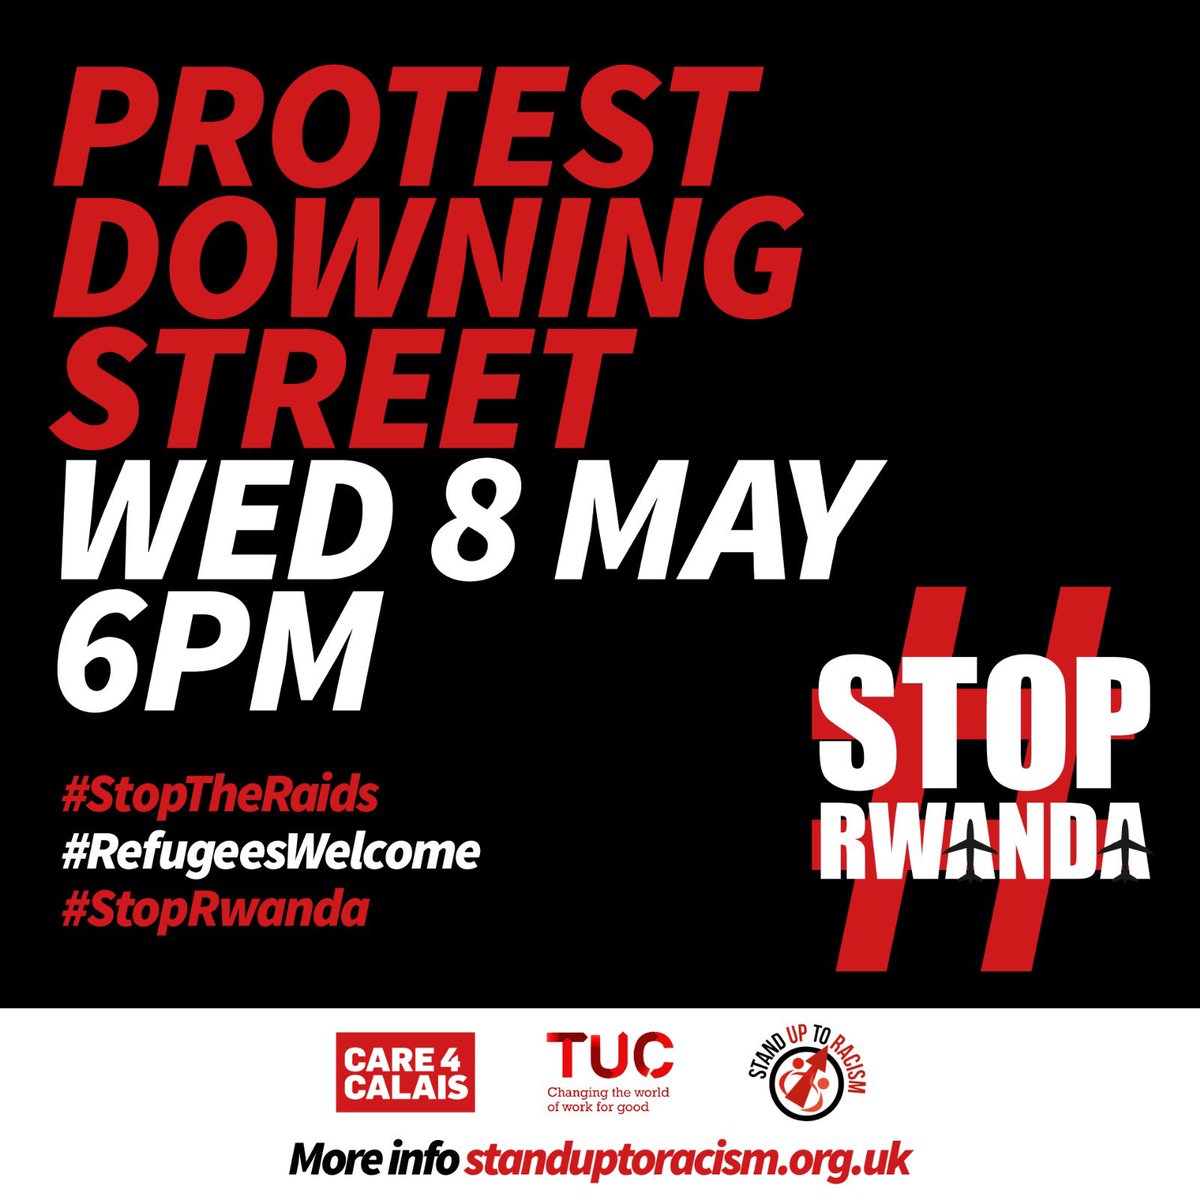 The lower the Tories sink in the polls, the more desperate they are to blame refugees for their own failures. Head to Downing Street tonight at 6pm to protest against their shock detention raids and Rwanda deportation scheme #StopRwanda #RwandaNotInMyName